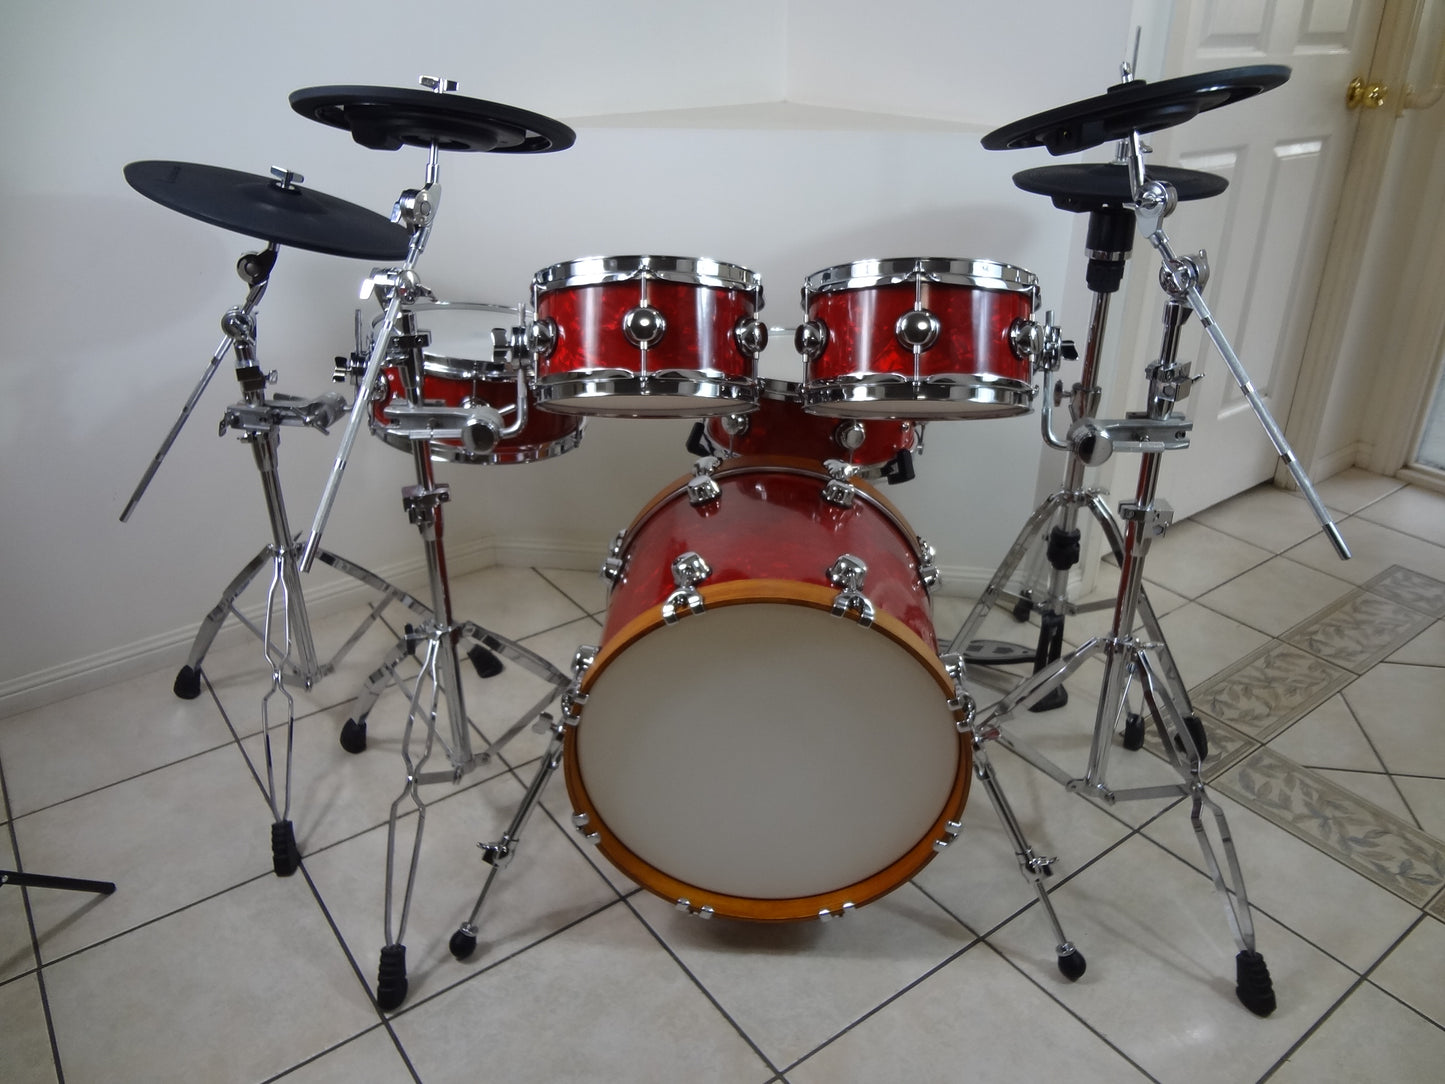 5 PIECE CUSTOM BUILT ELECTRONIC DRUM KIT (ELECTRONIC CYMBALS AND HARDWARE INCLUDED)